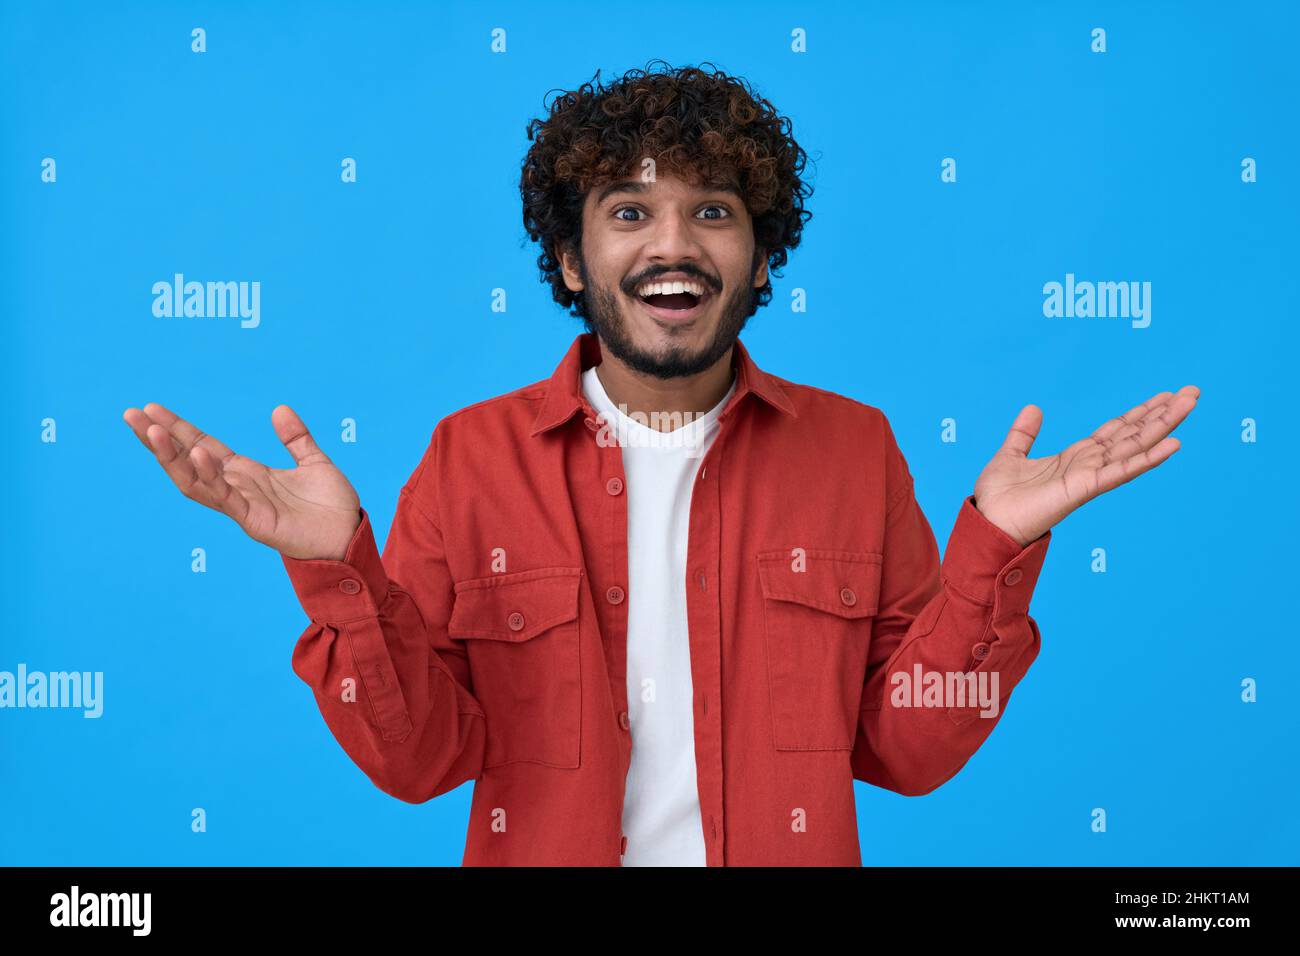 Surprised excited young indian man isolated on blue background. Stock Photo